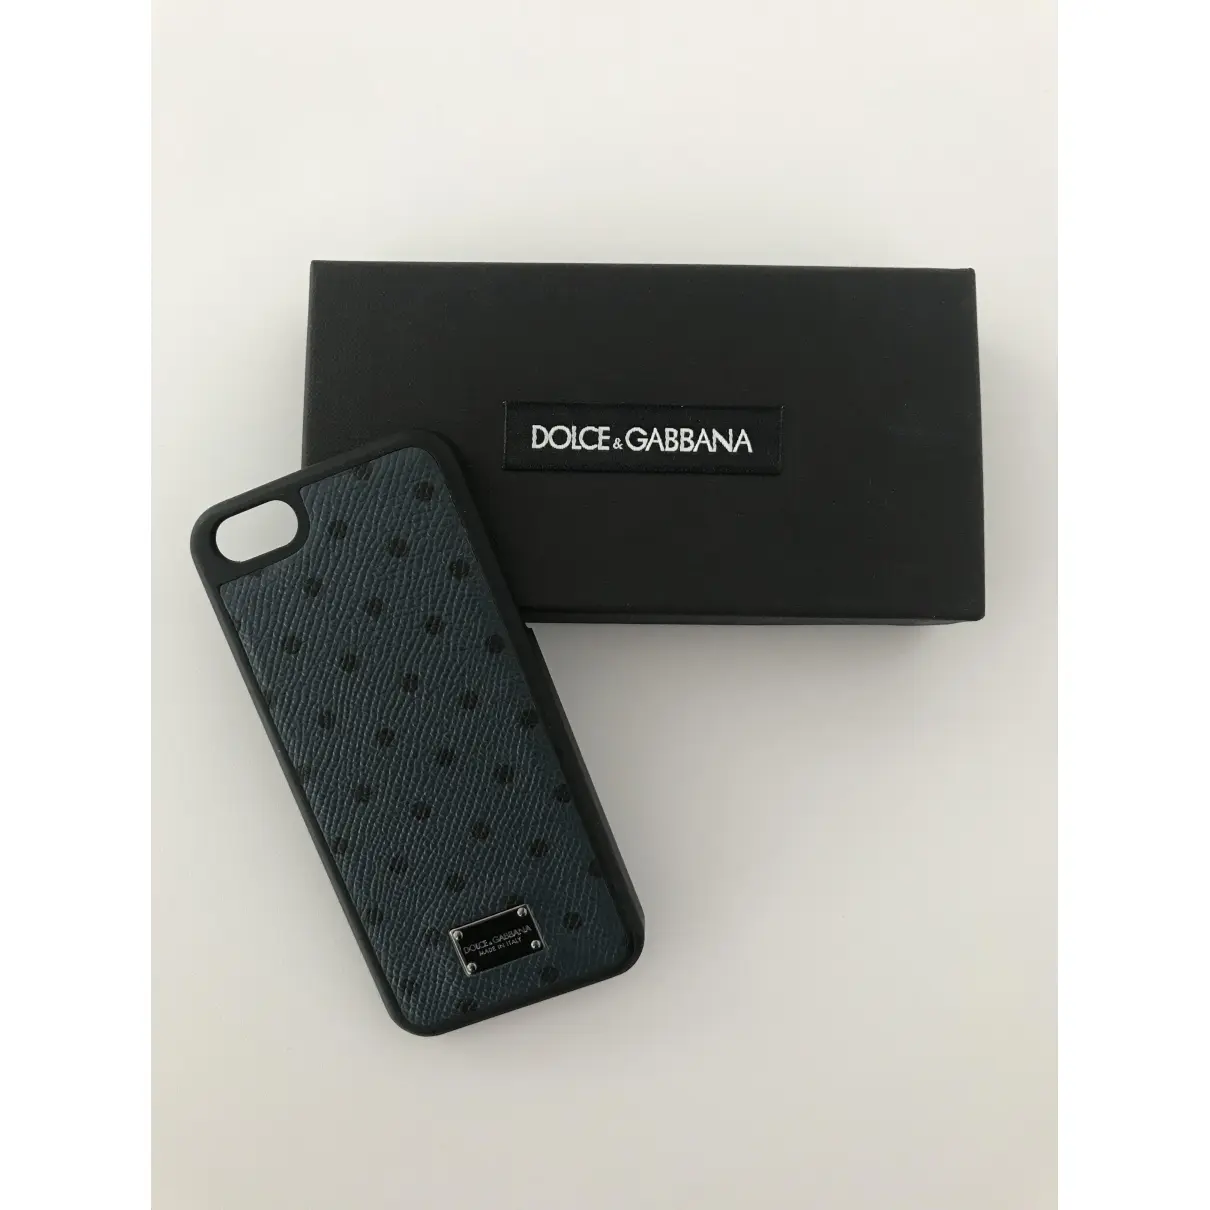 Dolce & Gabbana Leather iphone case for sale